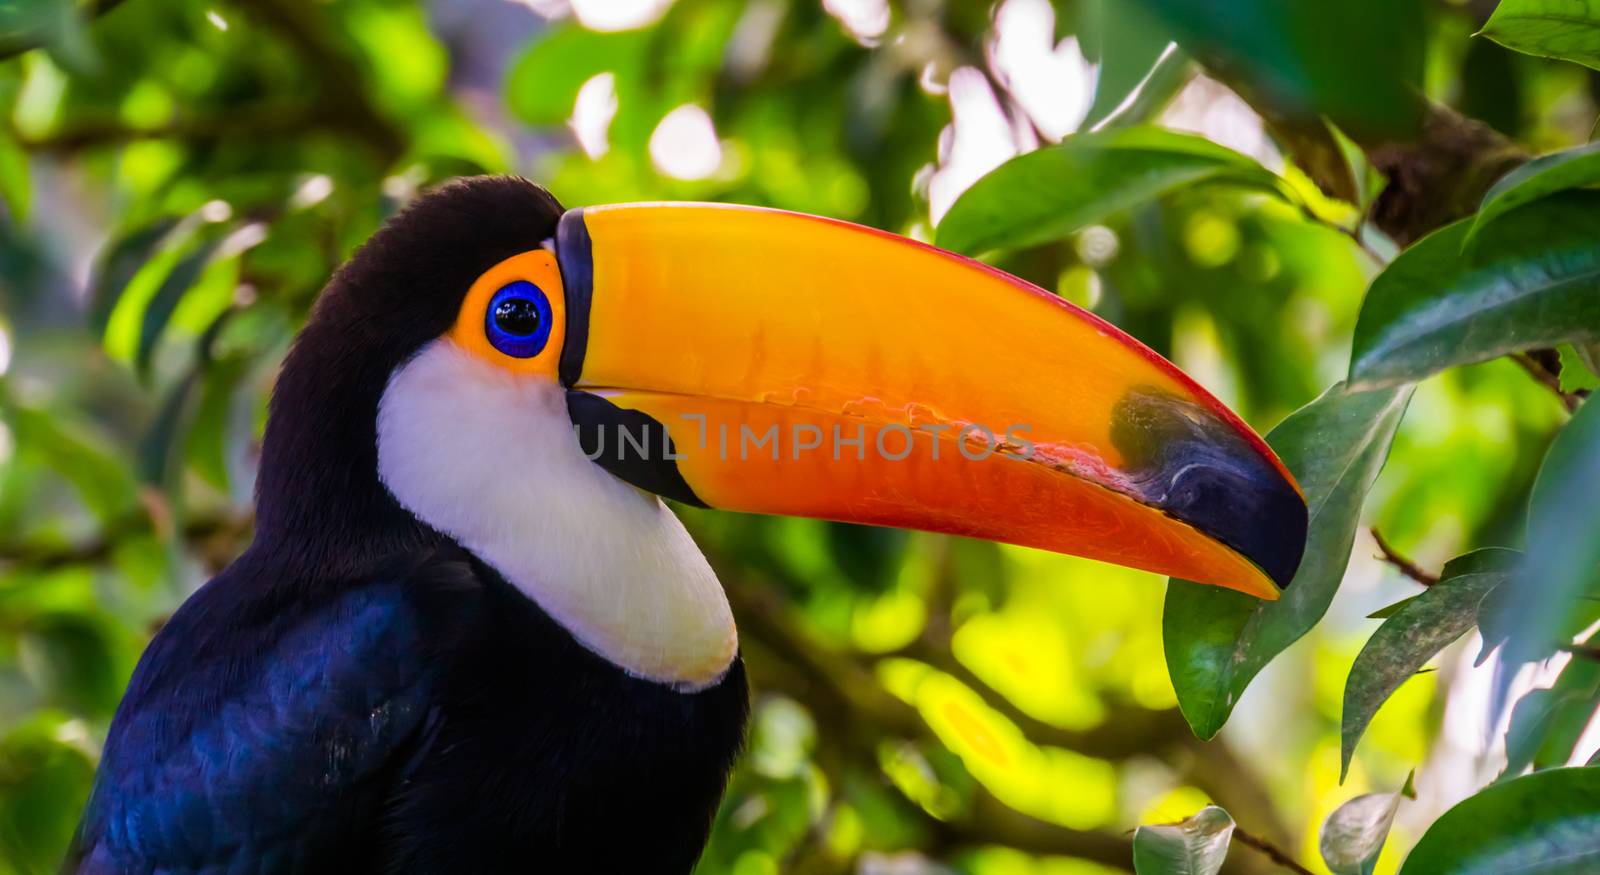 closeup portrait of the face of a toco toucan, tropical bird specie from America